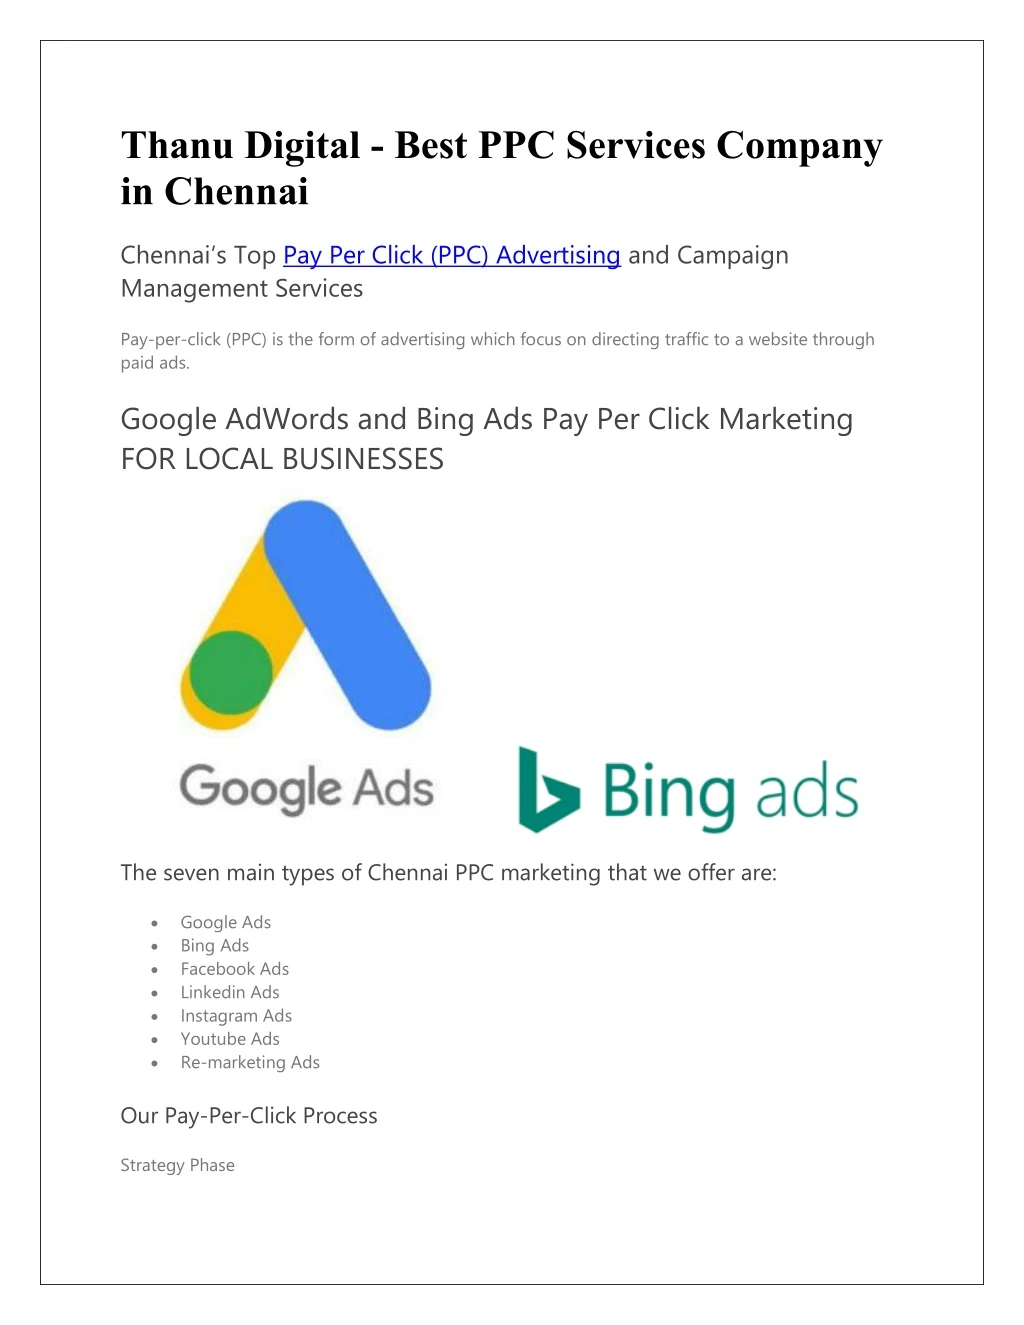 thanu digital best ppc services company in chennai